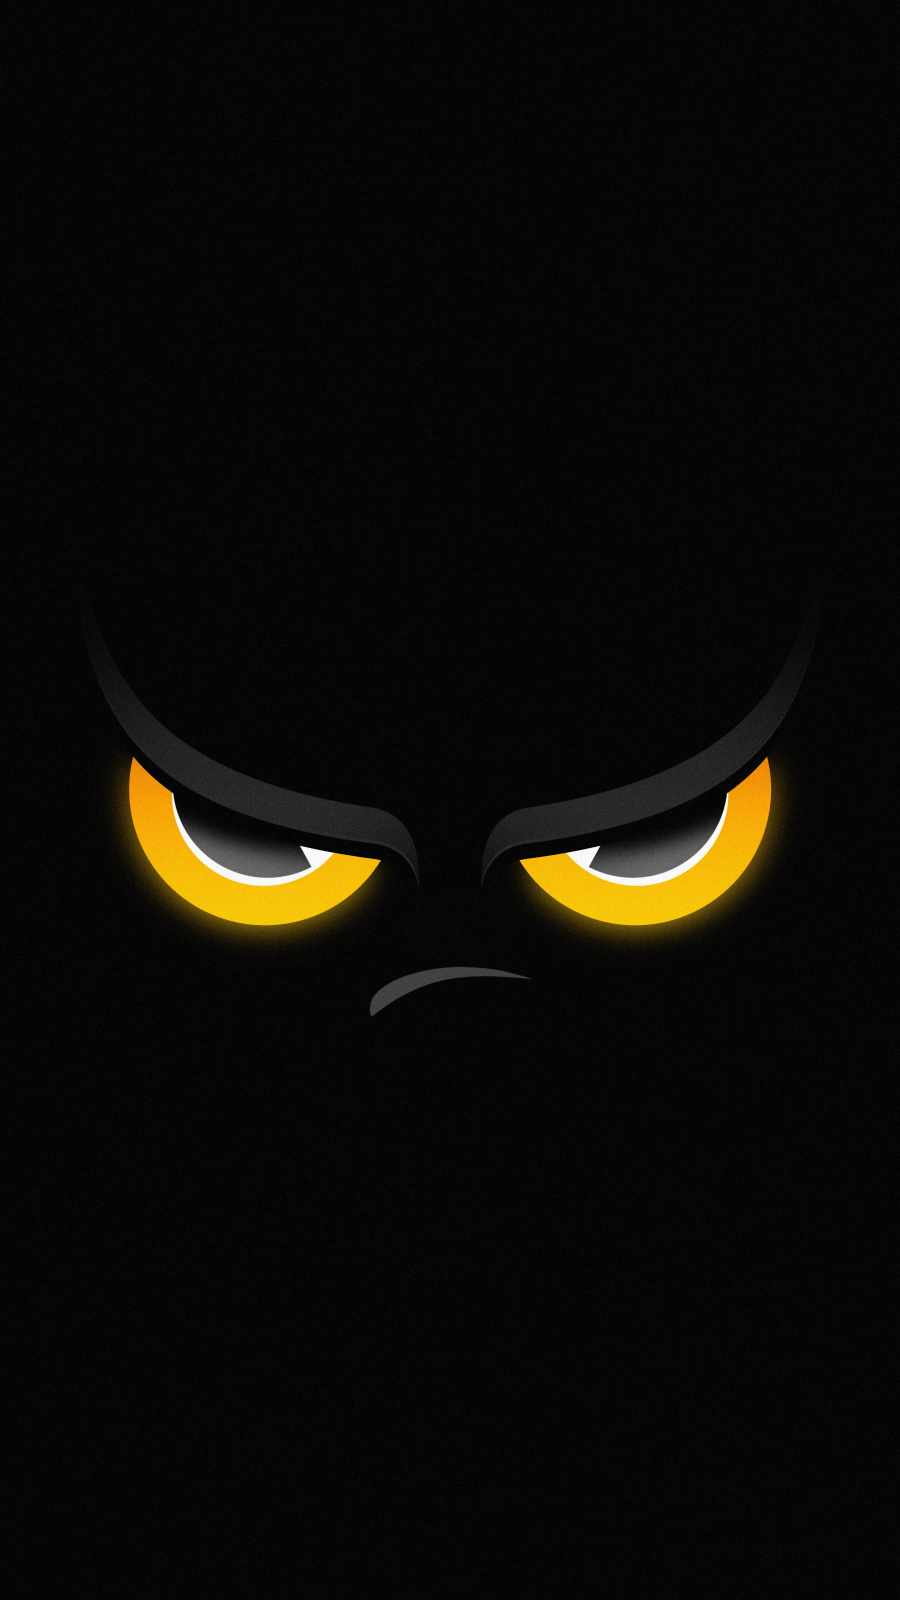 Angry Face iPhone Wallpaper HD